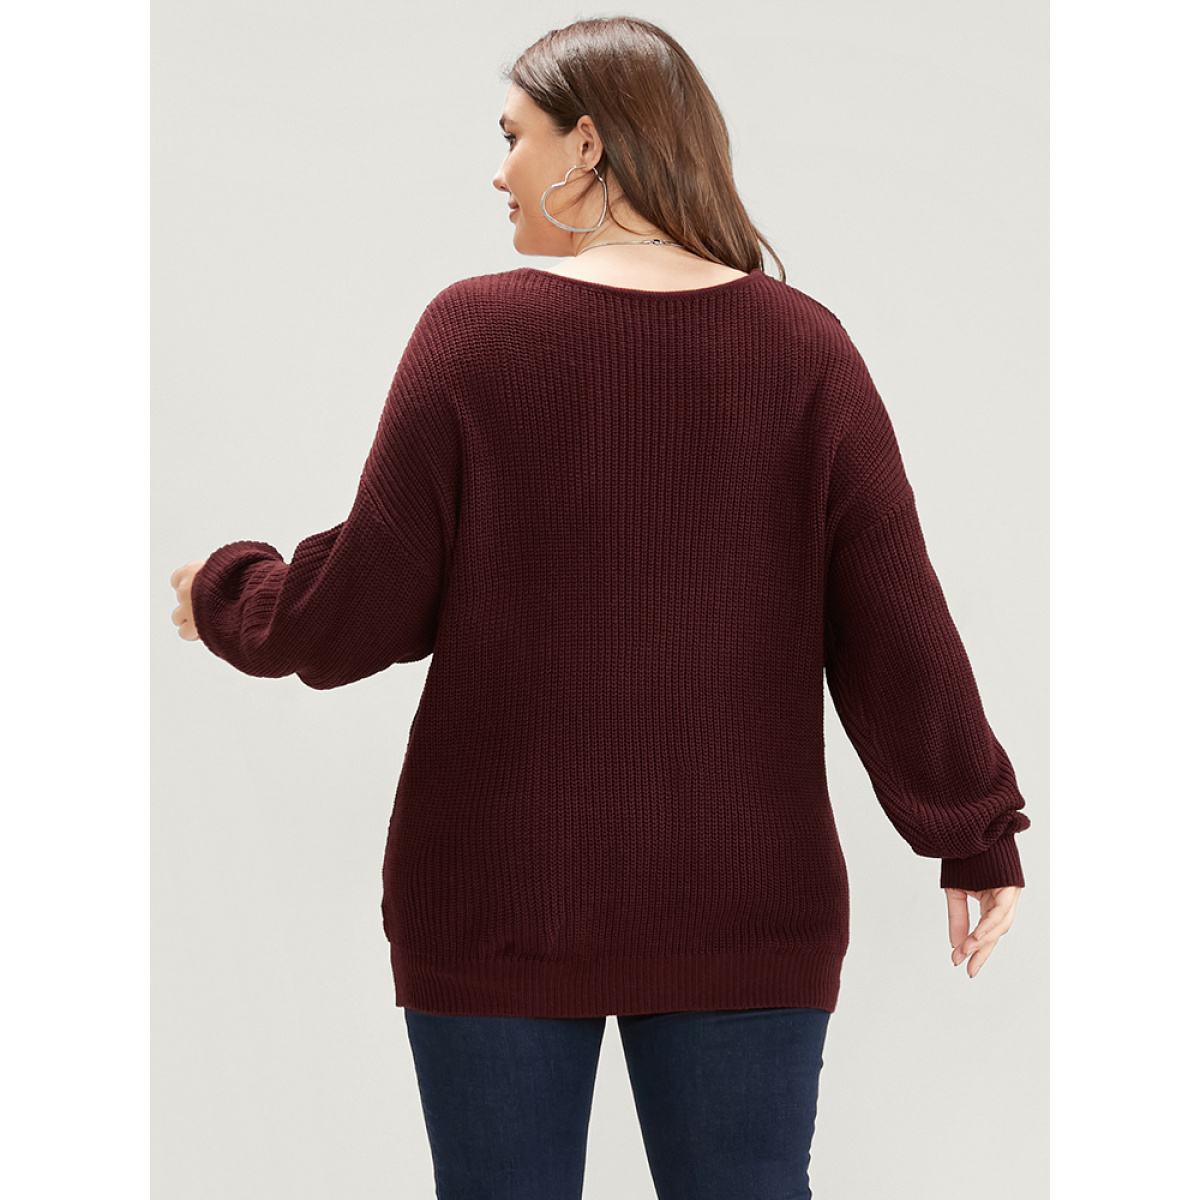 

Plus Size Solid Pointelle Knit Surplice Neck Cable Knit Top Scarlet Women Elegant Loose Long Sleeve Overlap Collar Dailywear Pullovers BloomChic